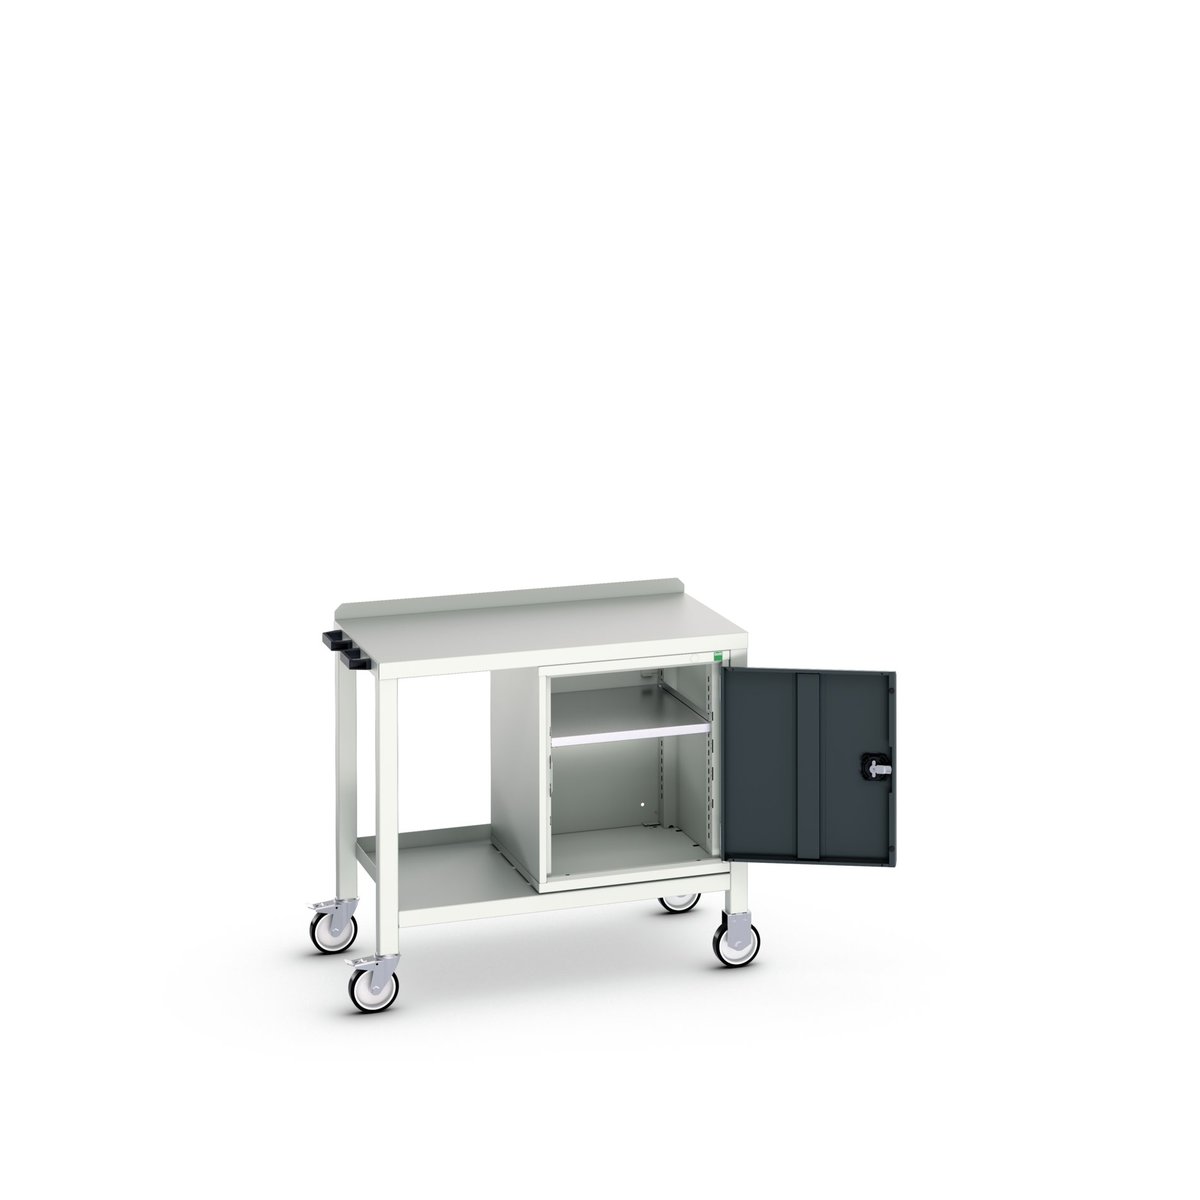 16922802. - verso mobile welded bench